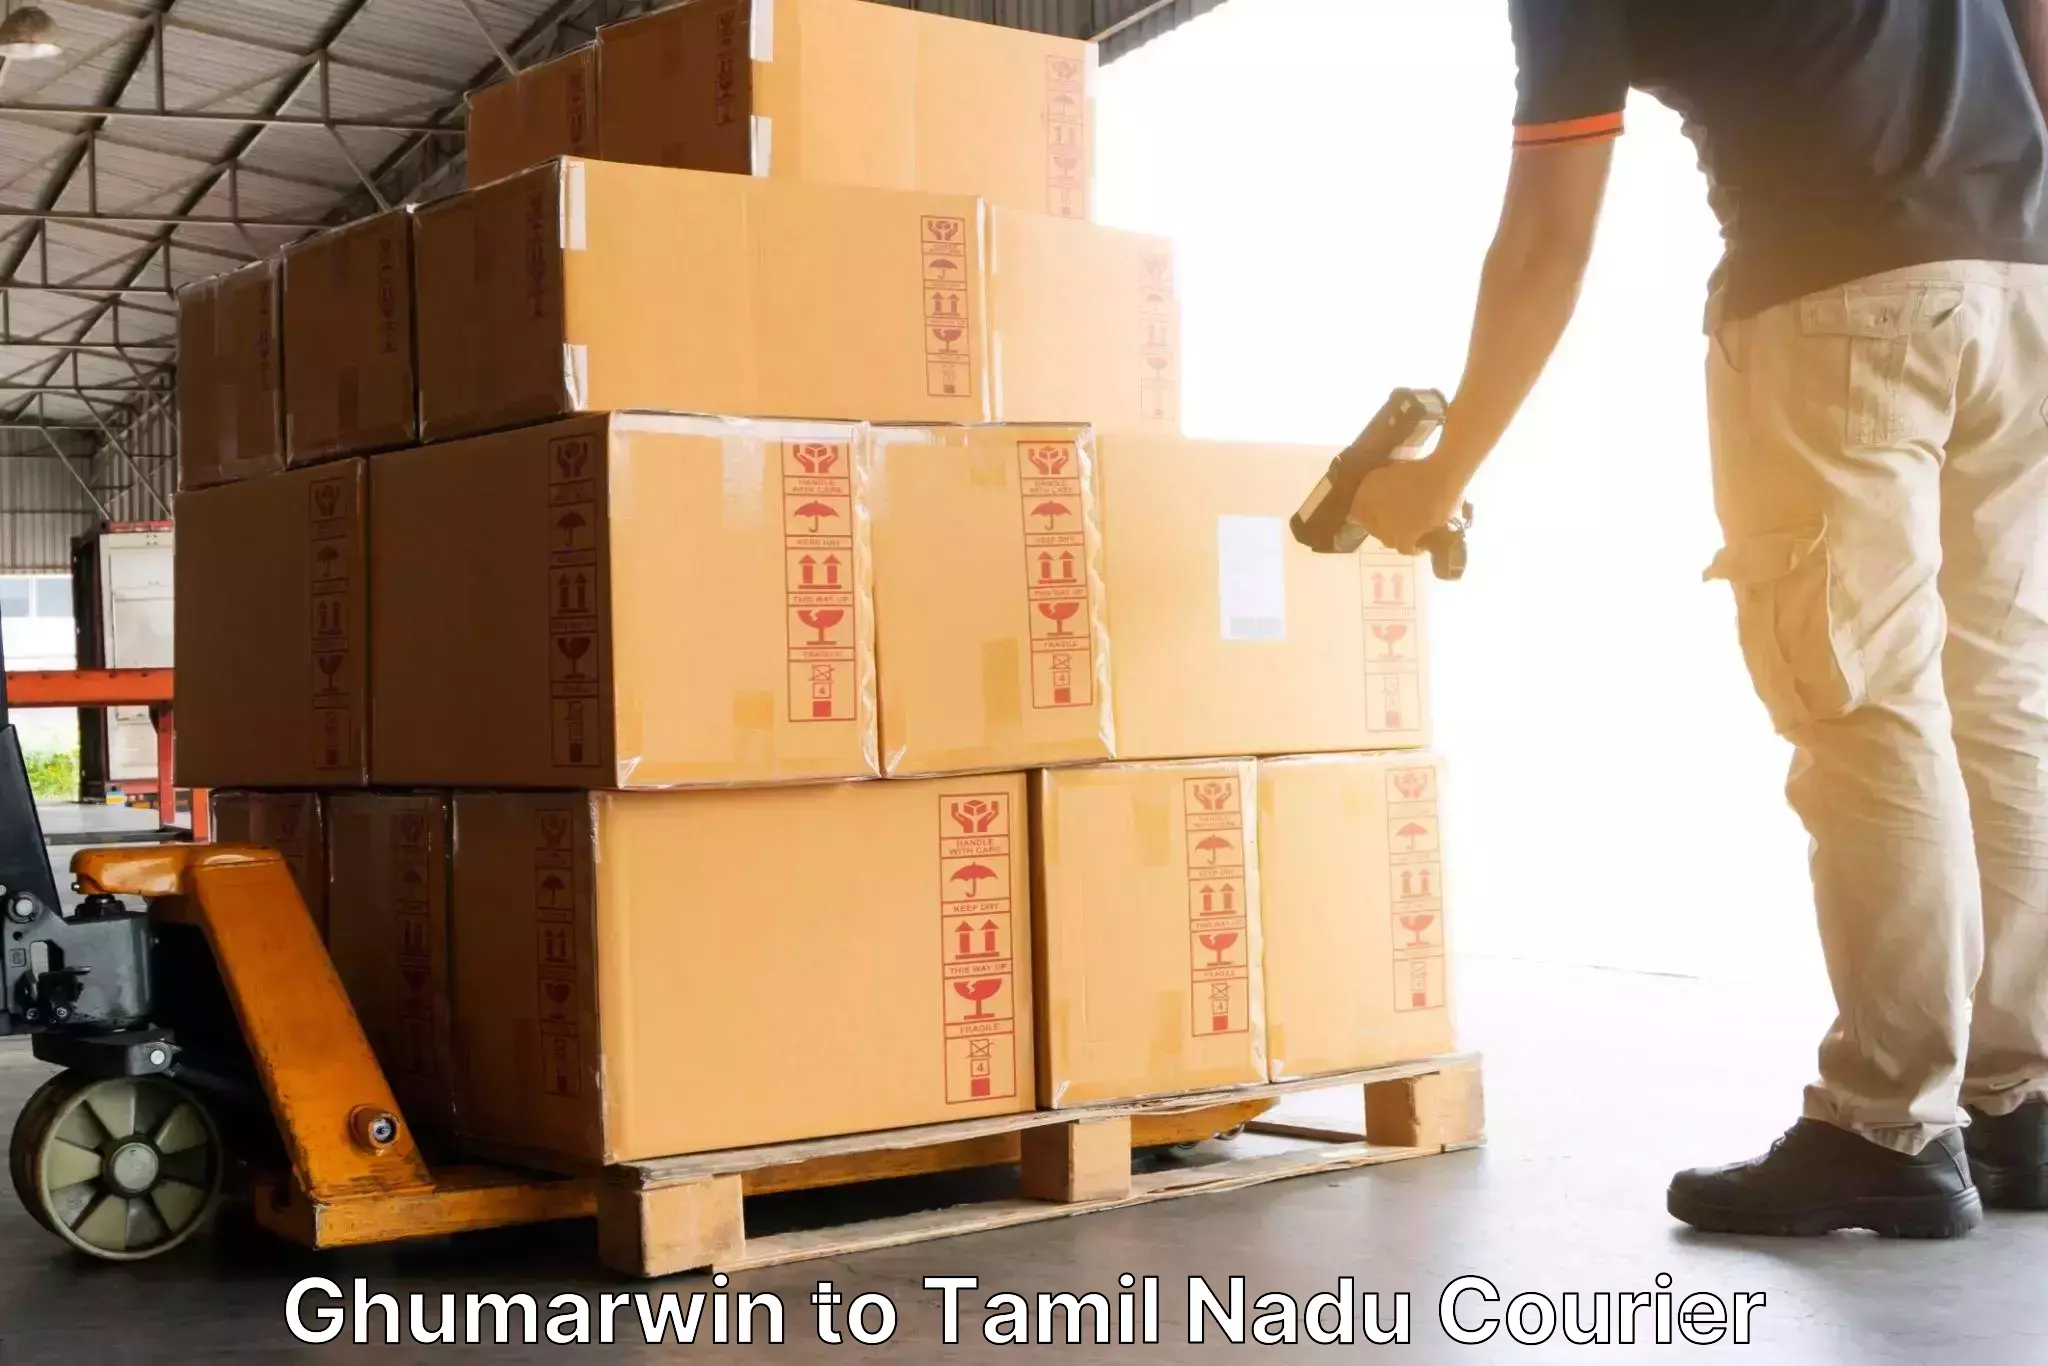 Full-service courier options in Ghumarwin to Palladam